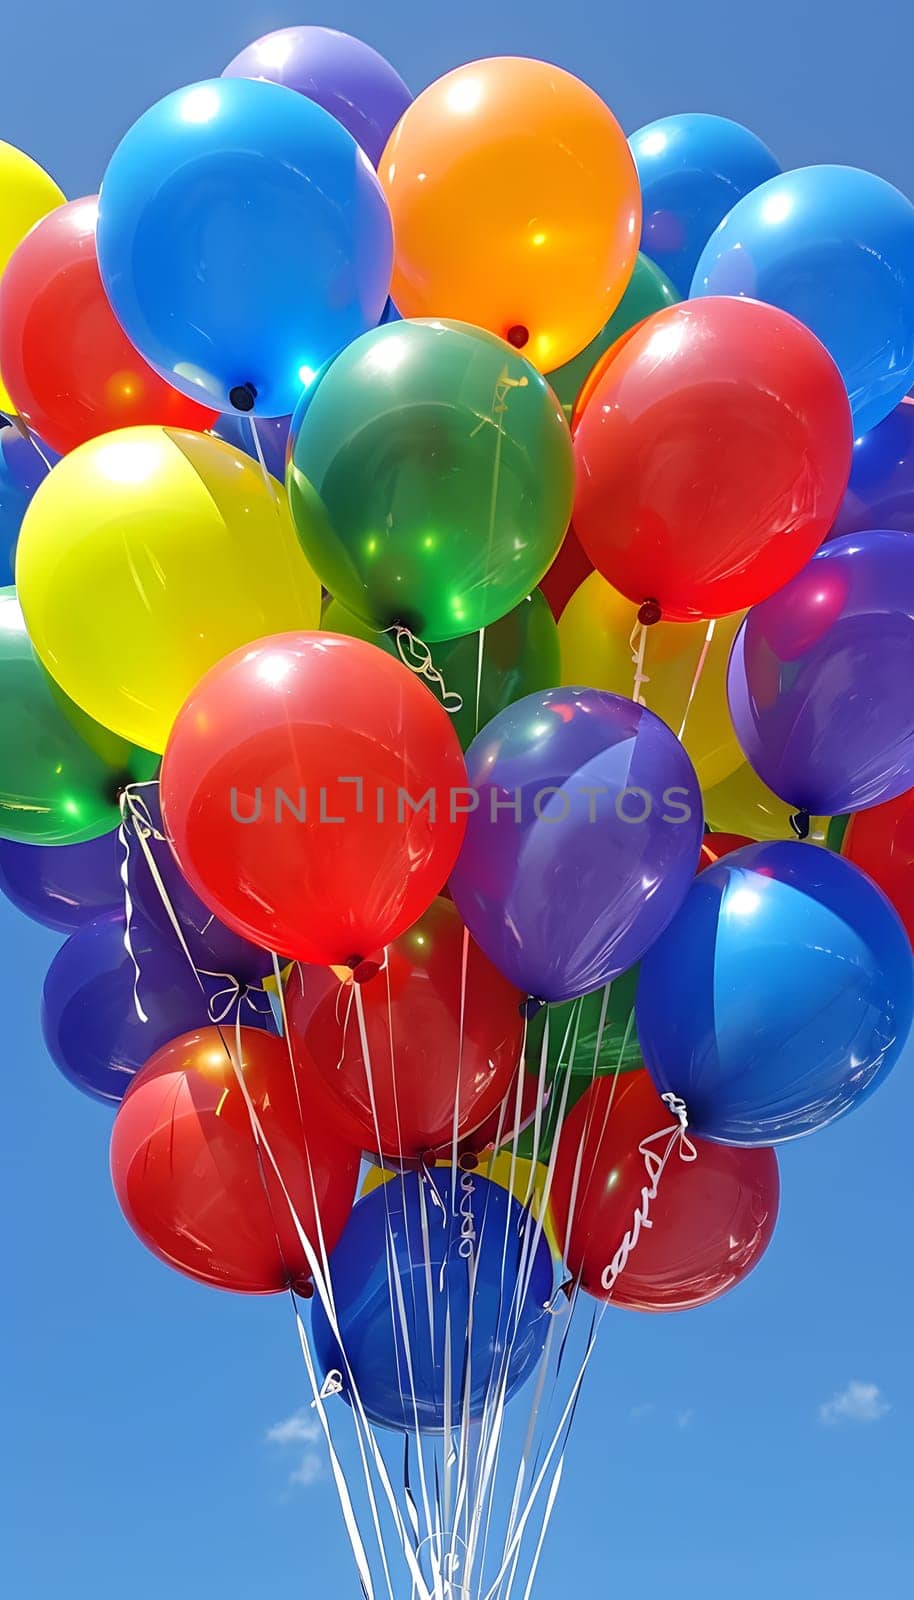 Vivid balloons soar in azure sky, a colorful spectacle in the light of nature by Nadtochiy